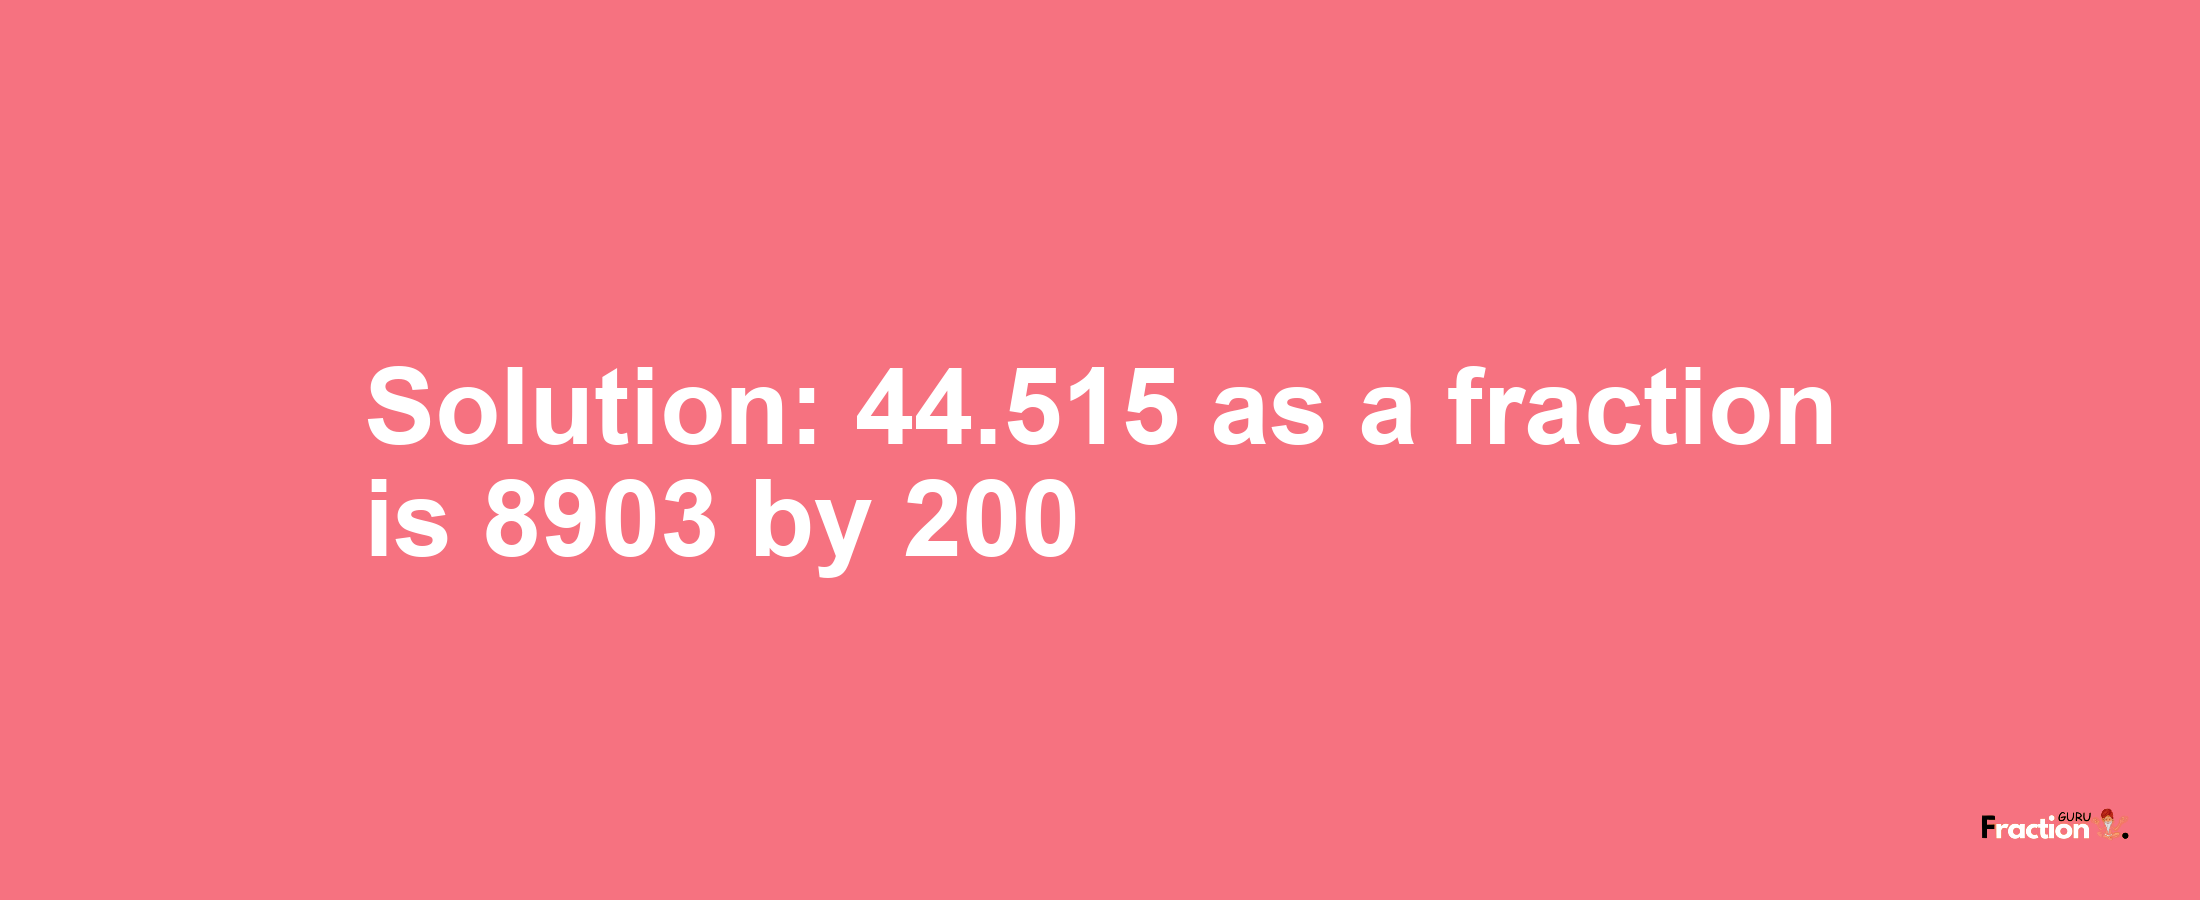 Solution:44.515 as a fraction is 8903/200